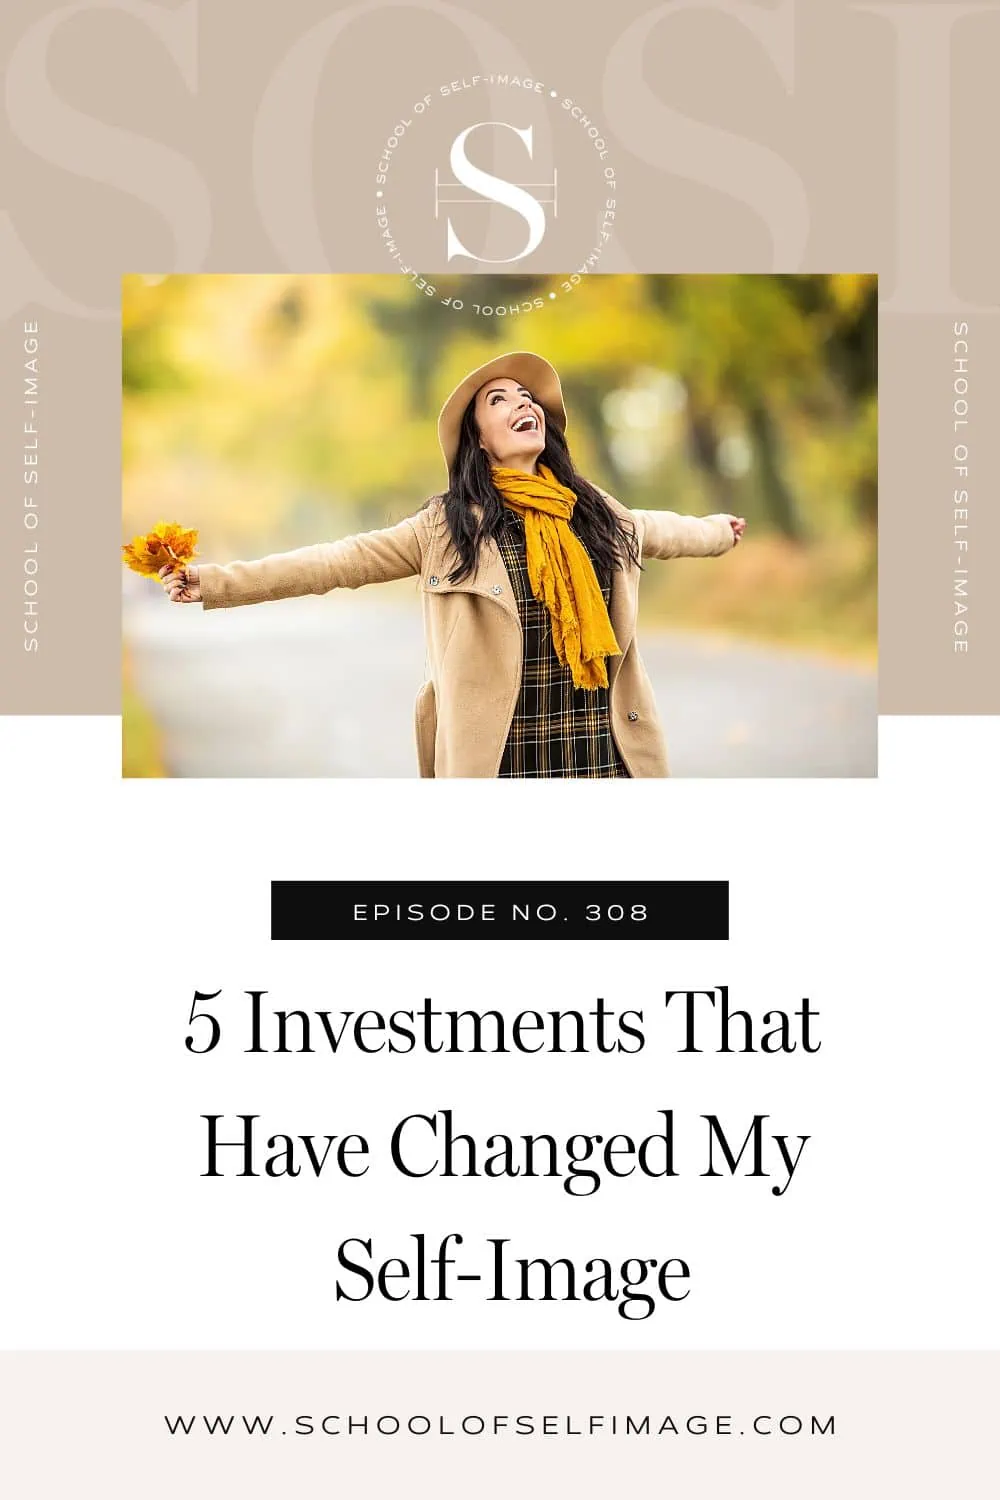 5 Investments That Have Changed My Self-Image